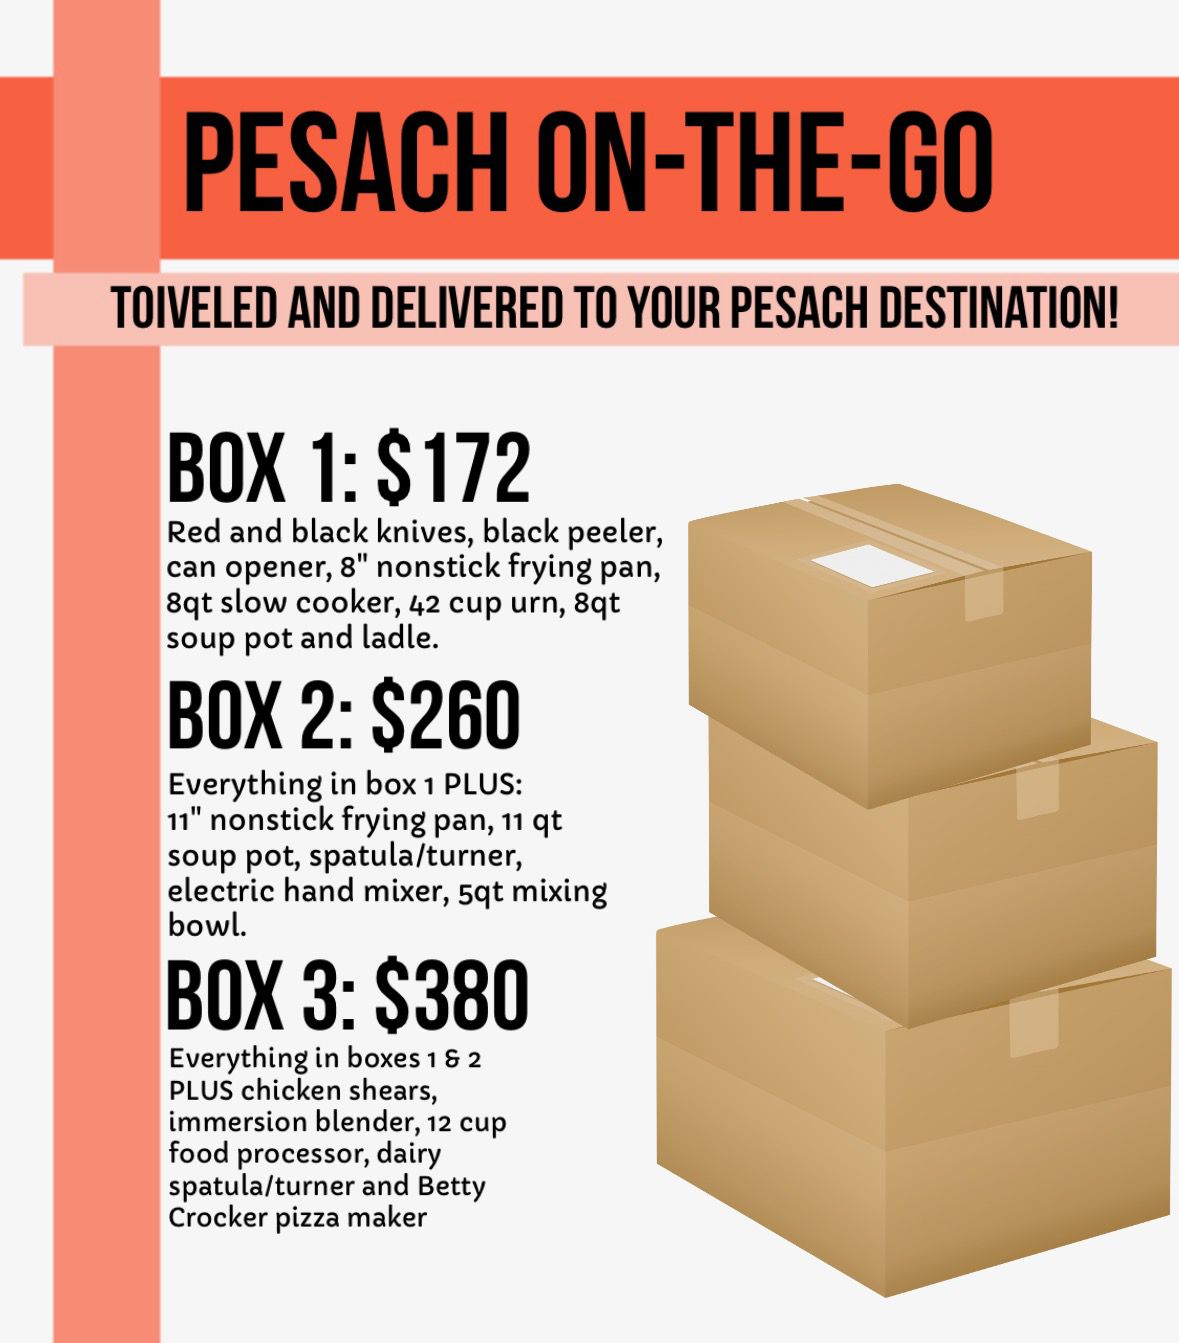 PESACH BOXES - Items Subject to Change Based on Availability - Multiple Box Options